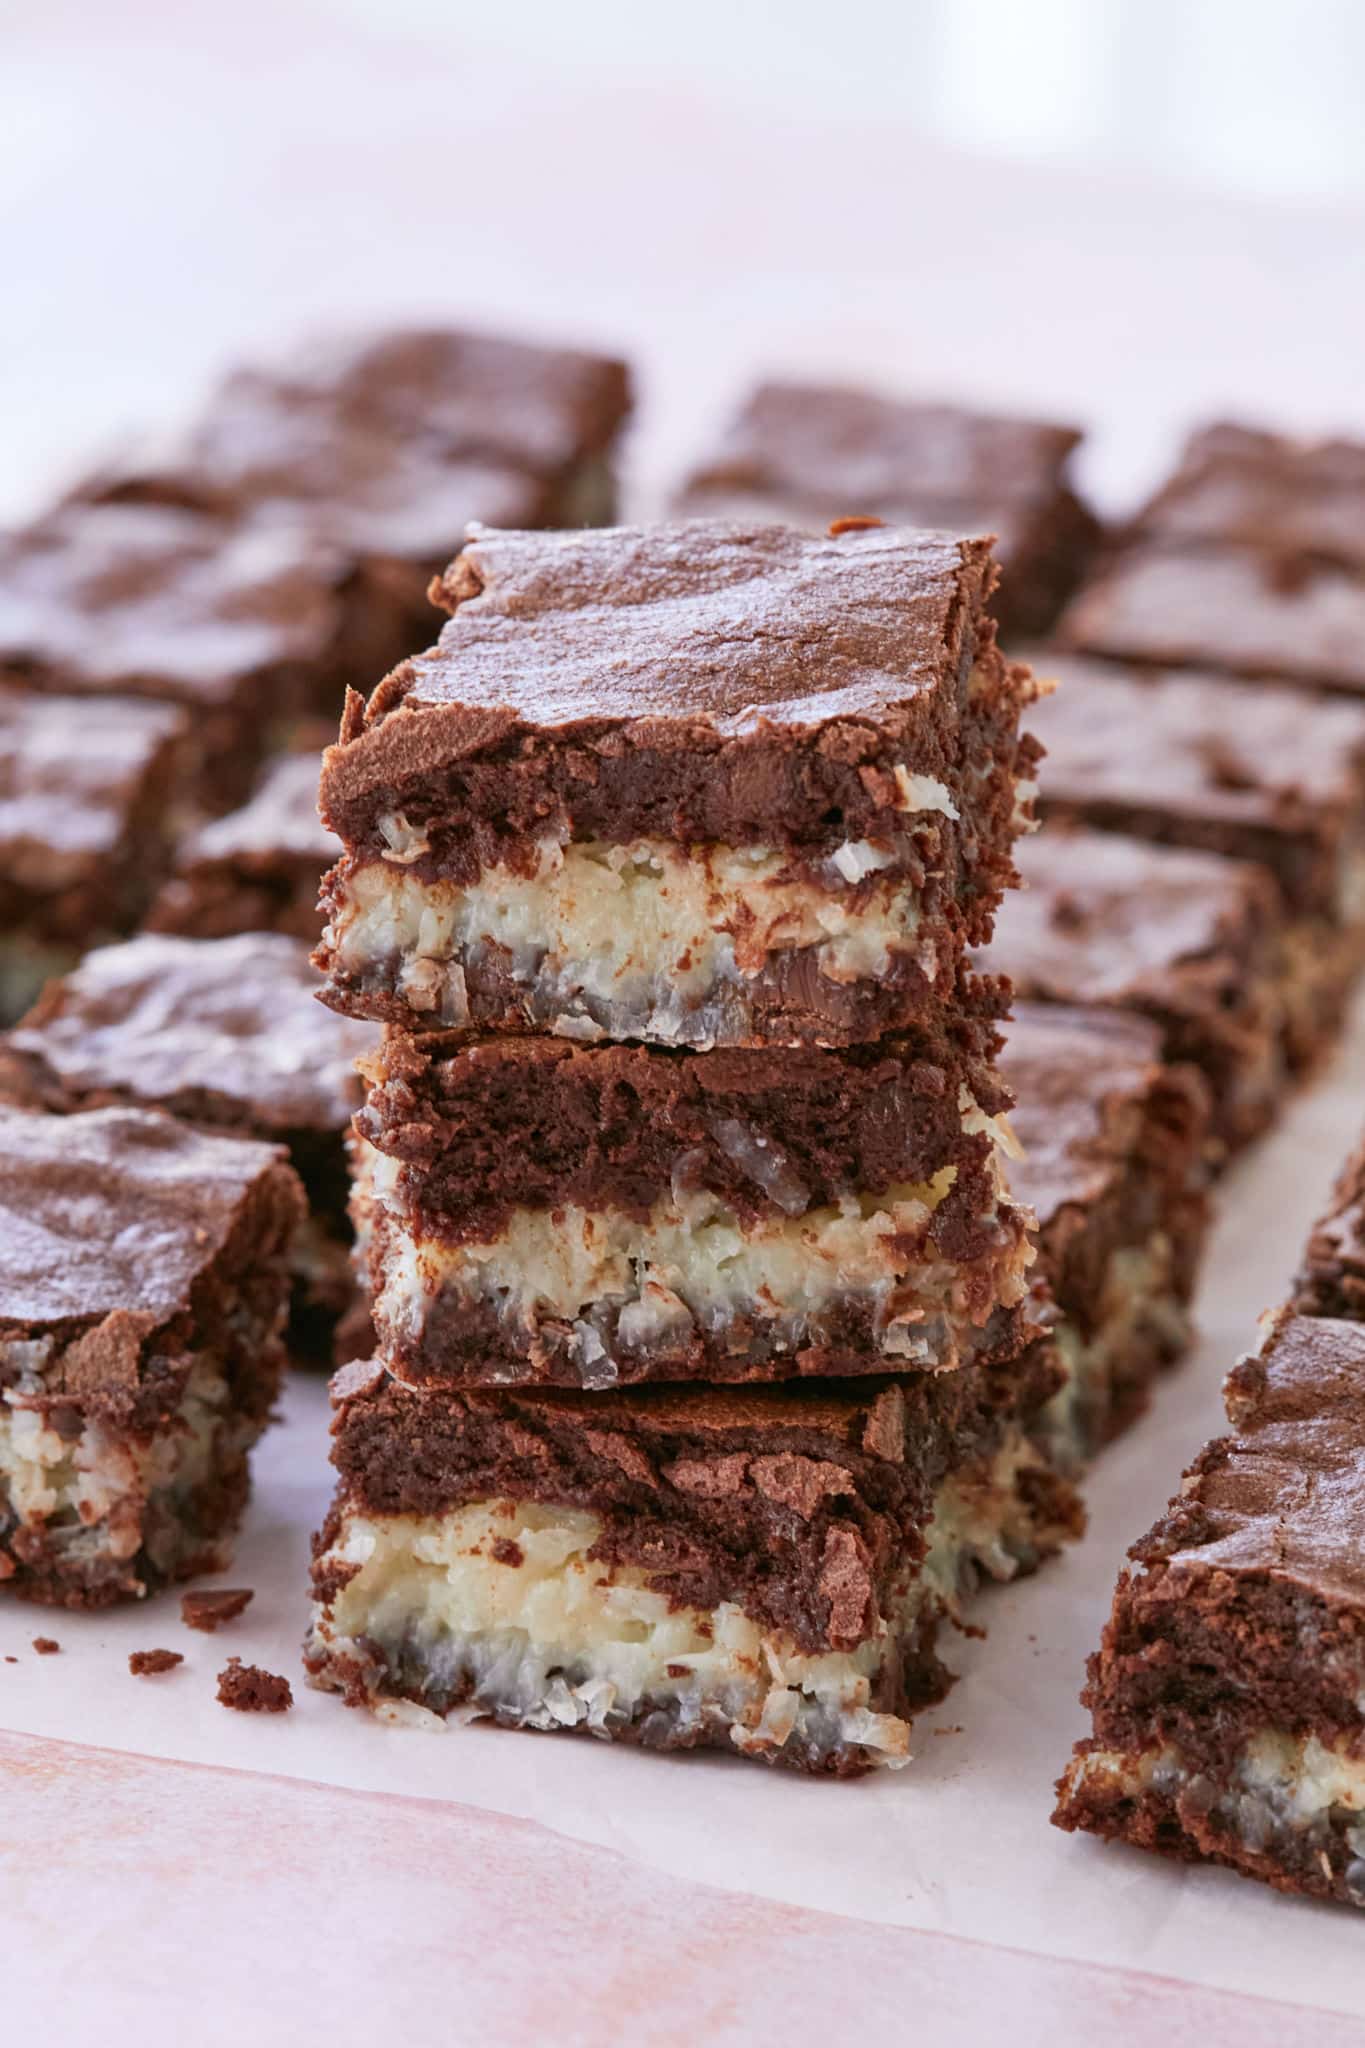 Three brownies with coconut macaroon filling are stacked up together next to other slices of the brownie recipe batch. The brownies are stuffed with coconut macaroon.